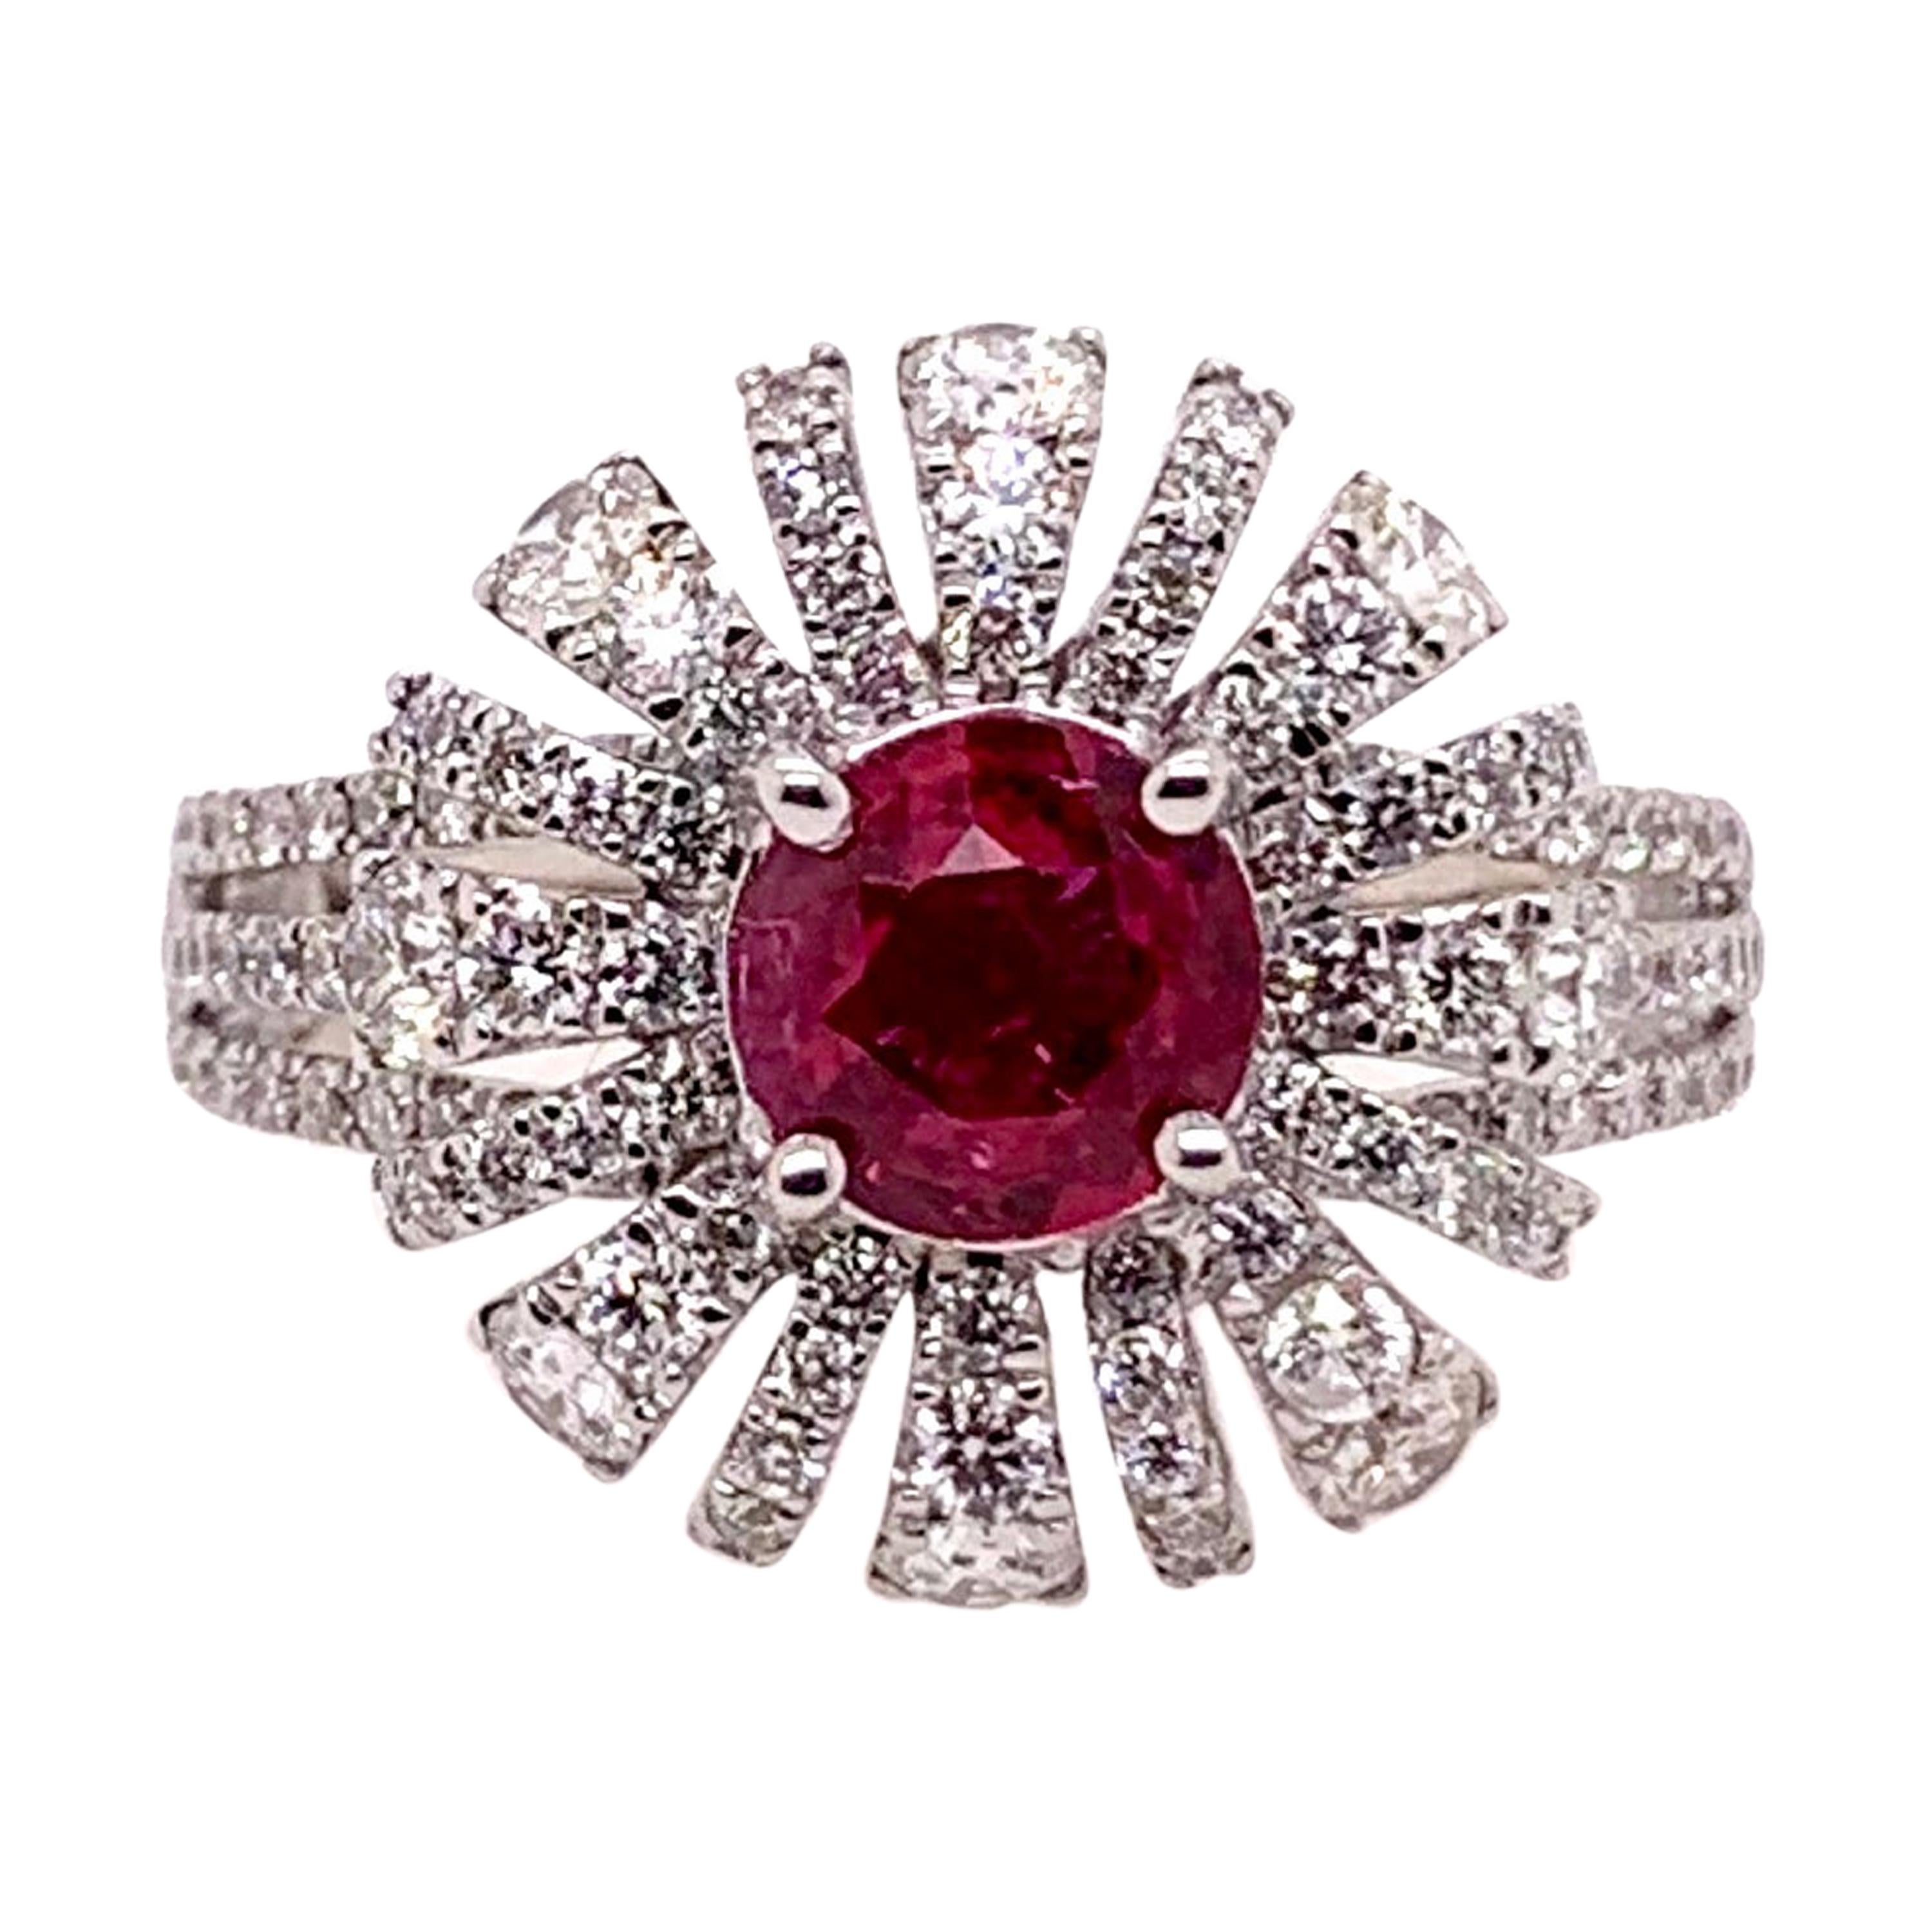 GIA Certified Heated Ruby Diamond Cocktail Ring in 18 Carat White Gold